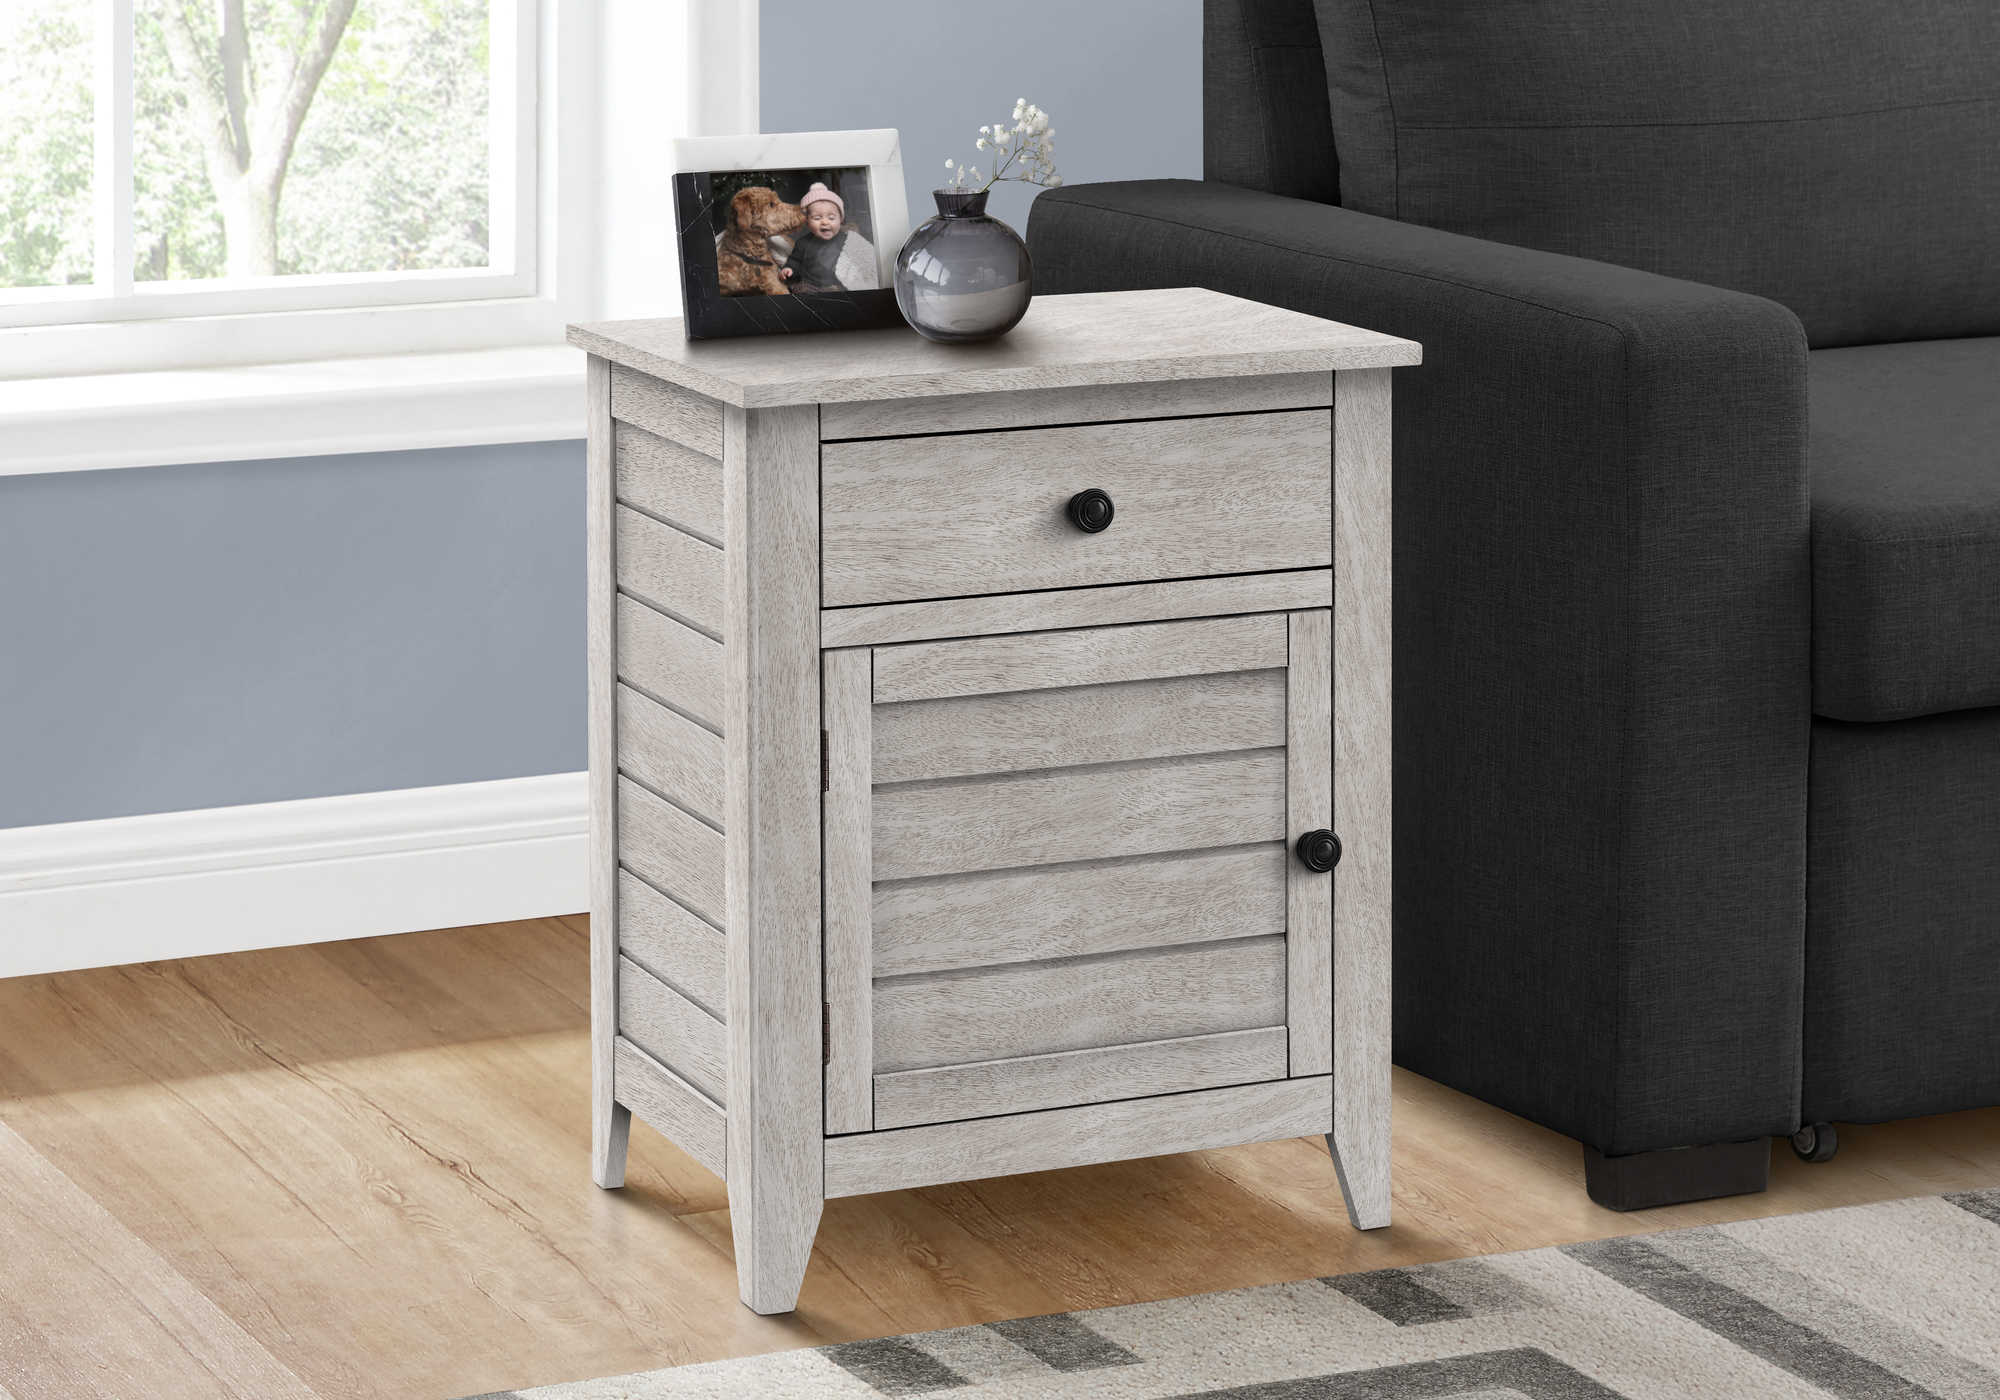 ACCENT TABLE - 25"H / WASHED GREY VENEER END TABLE